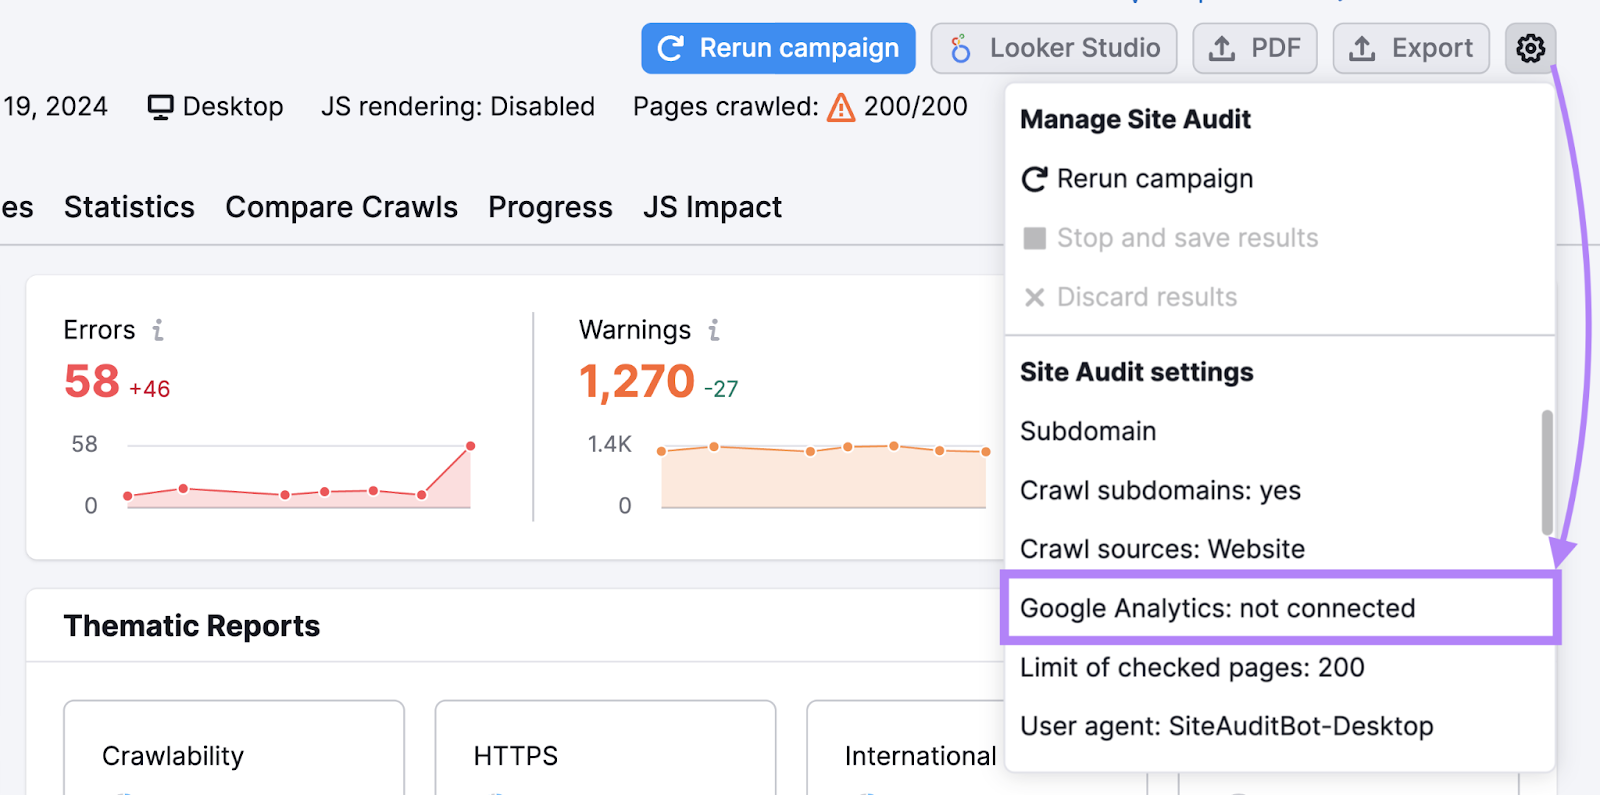 “Google Analytics: not connected" button in Site Audit tool